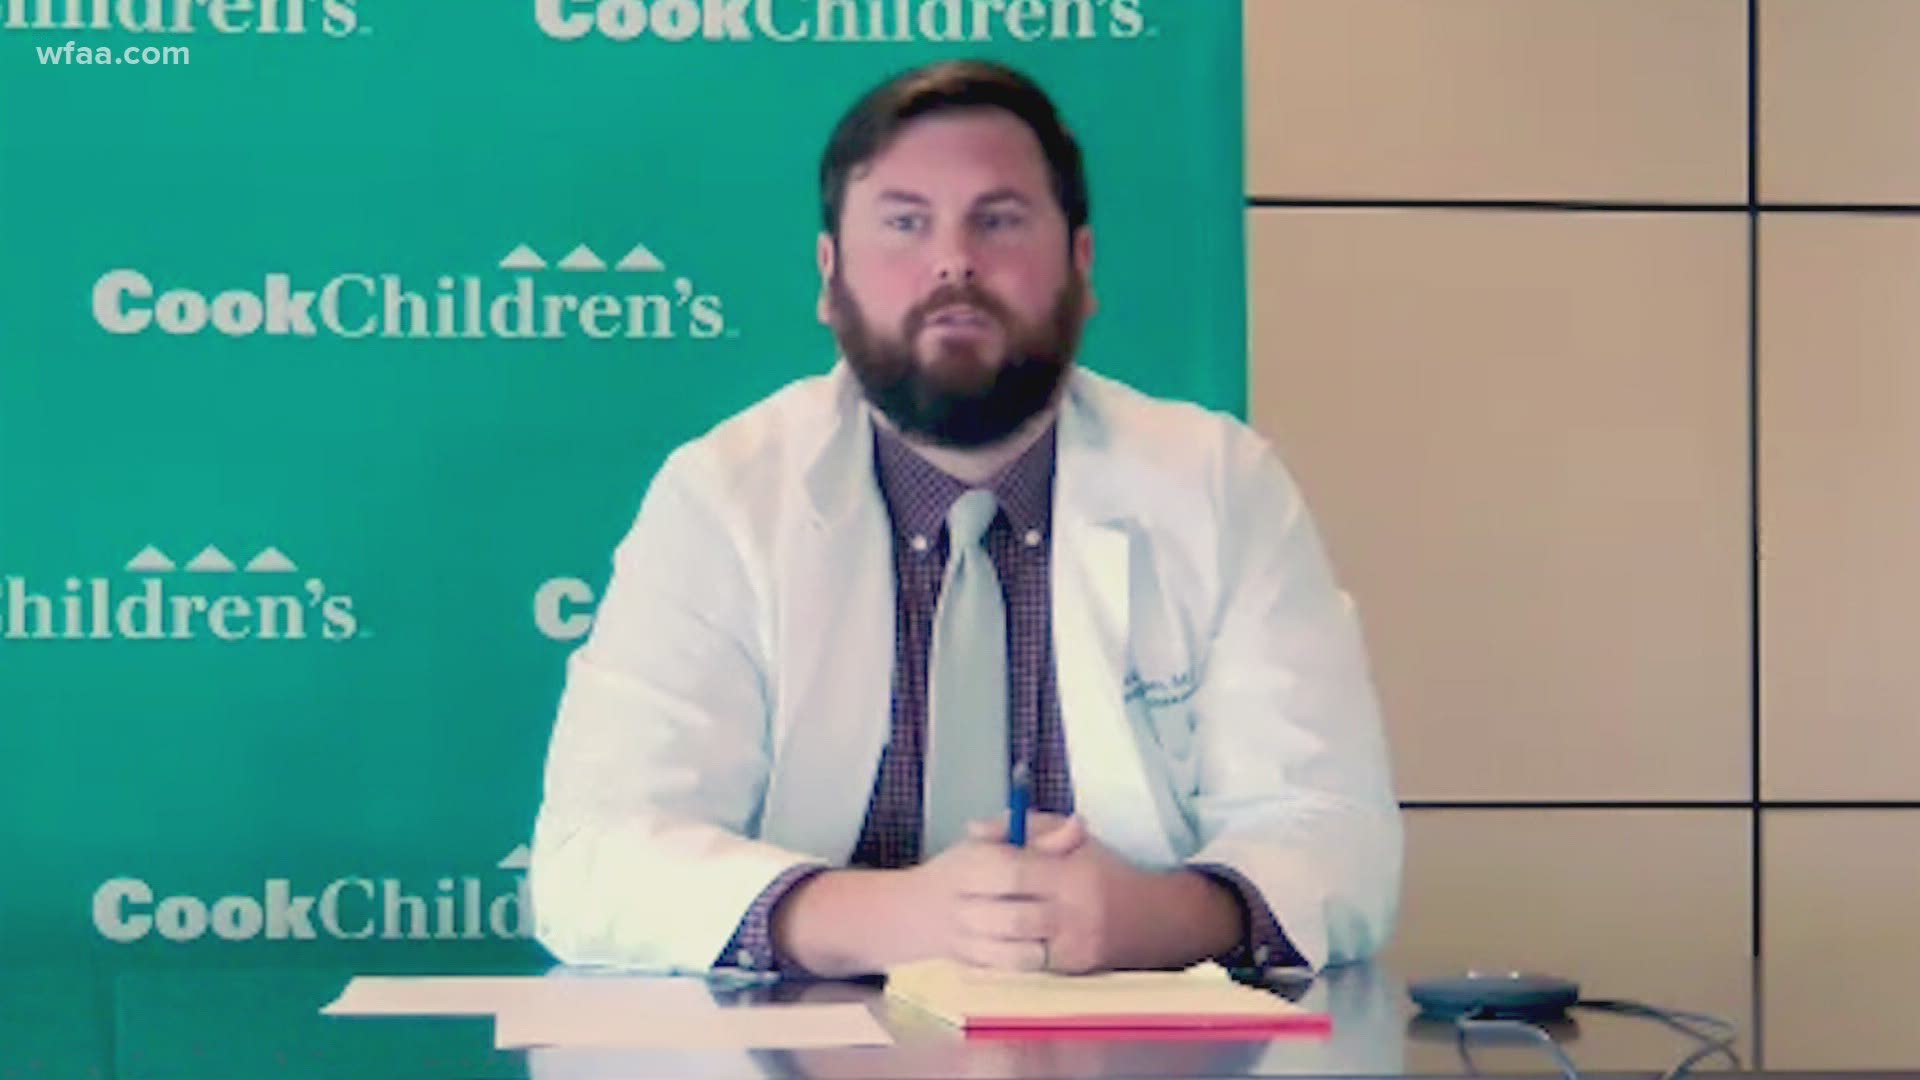 Hospital officials said the four patients range in age from 6 to 14 years old, and had been exposed to a person who tested positive for COVID-19.